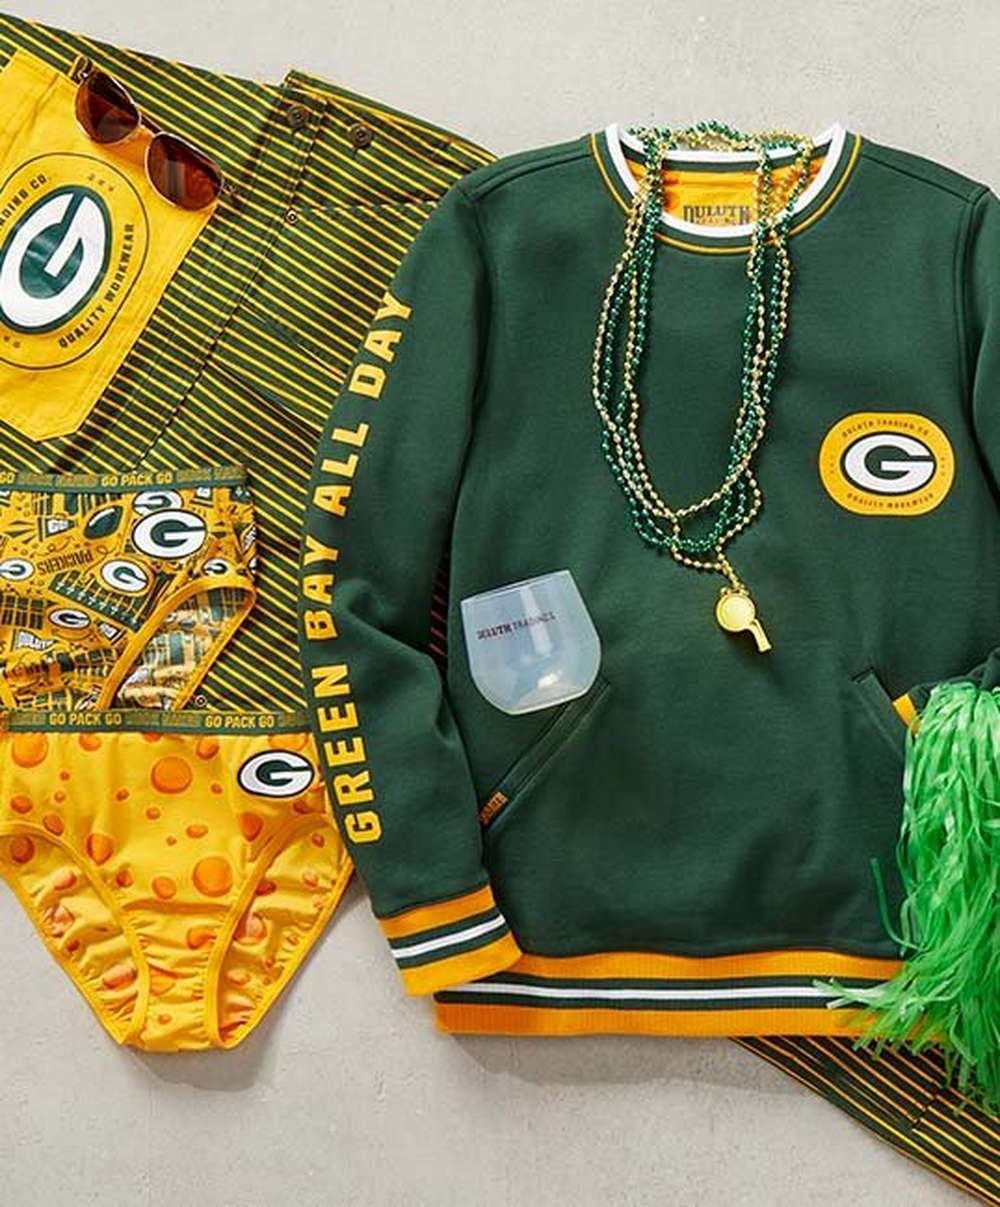 Assortment of women's Packers branded clothing